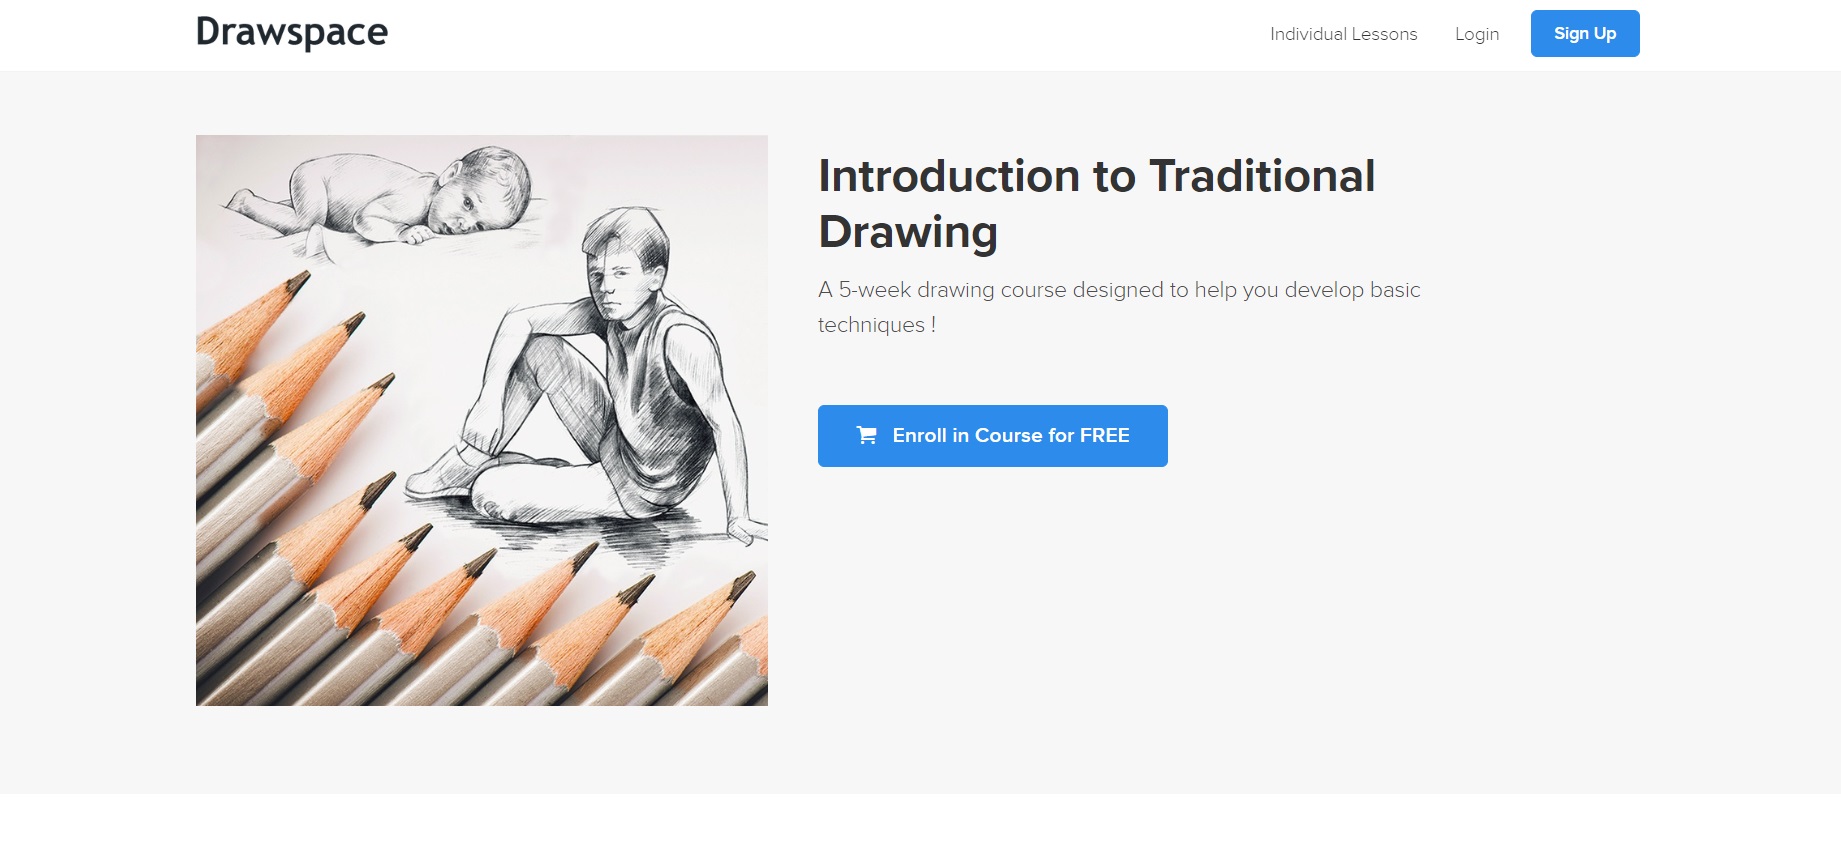 Free Drawing Courses & Training | reed.co.uk